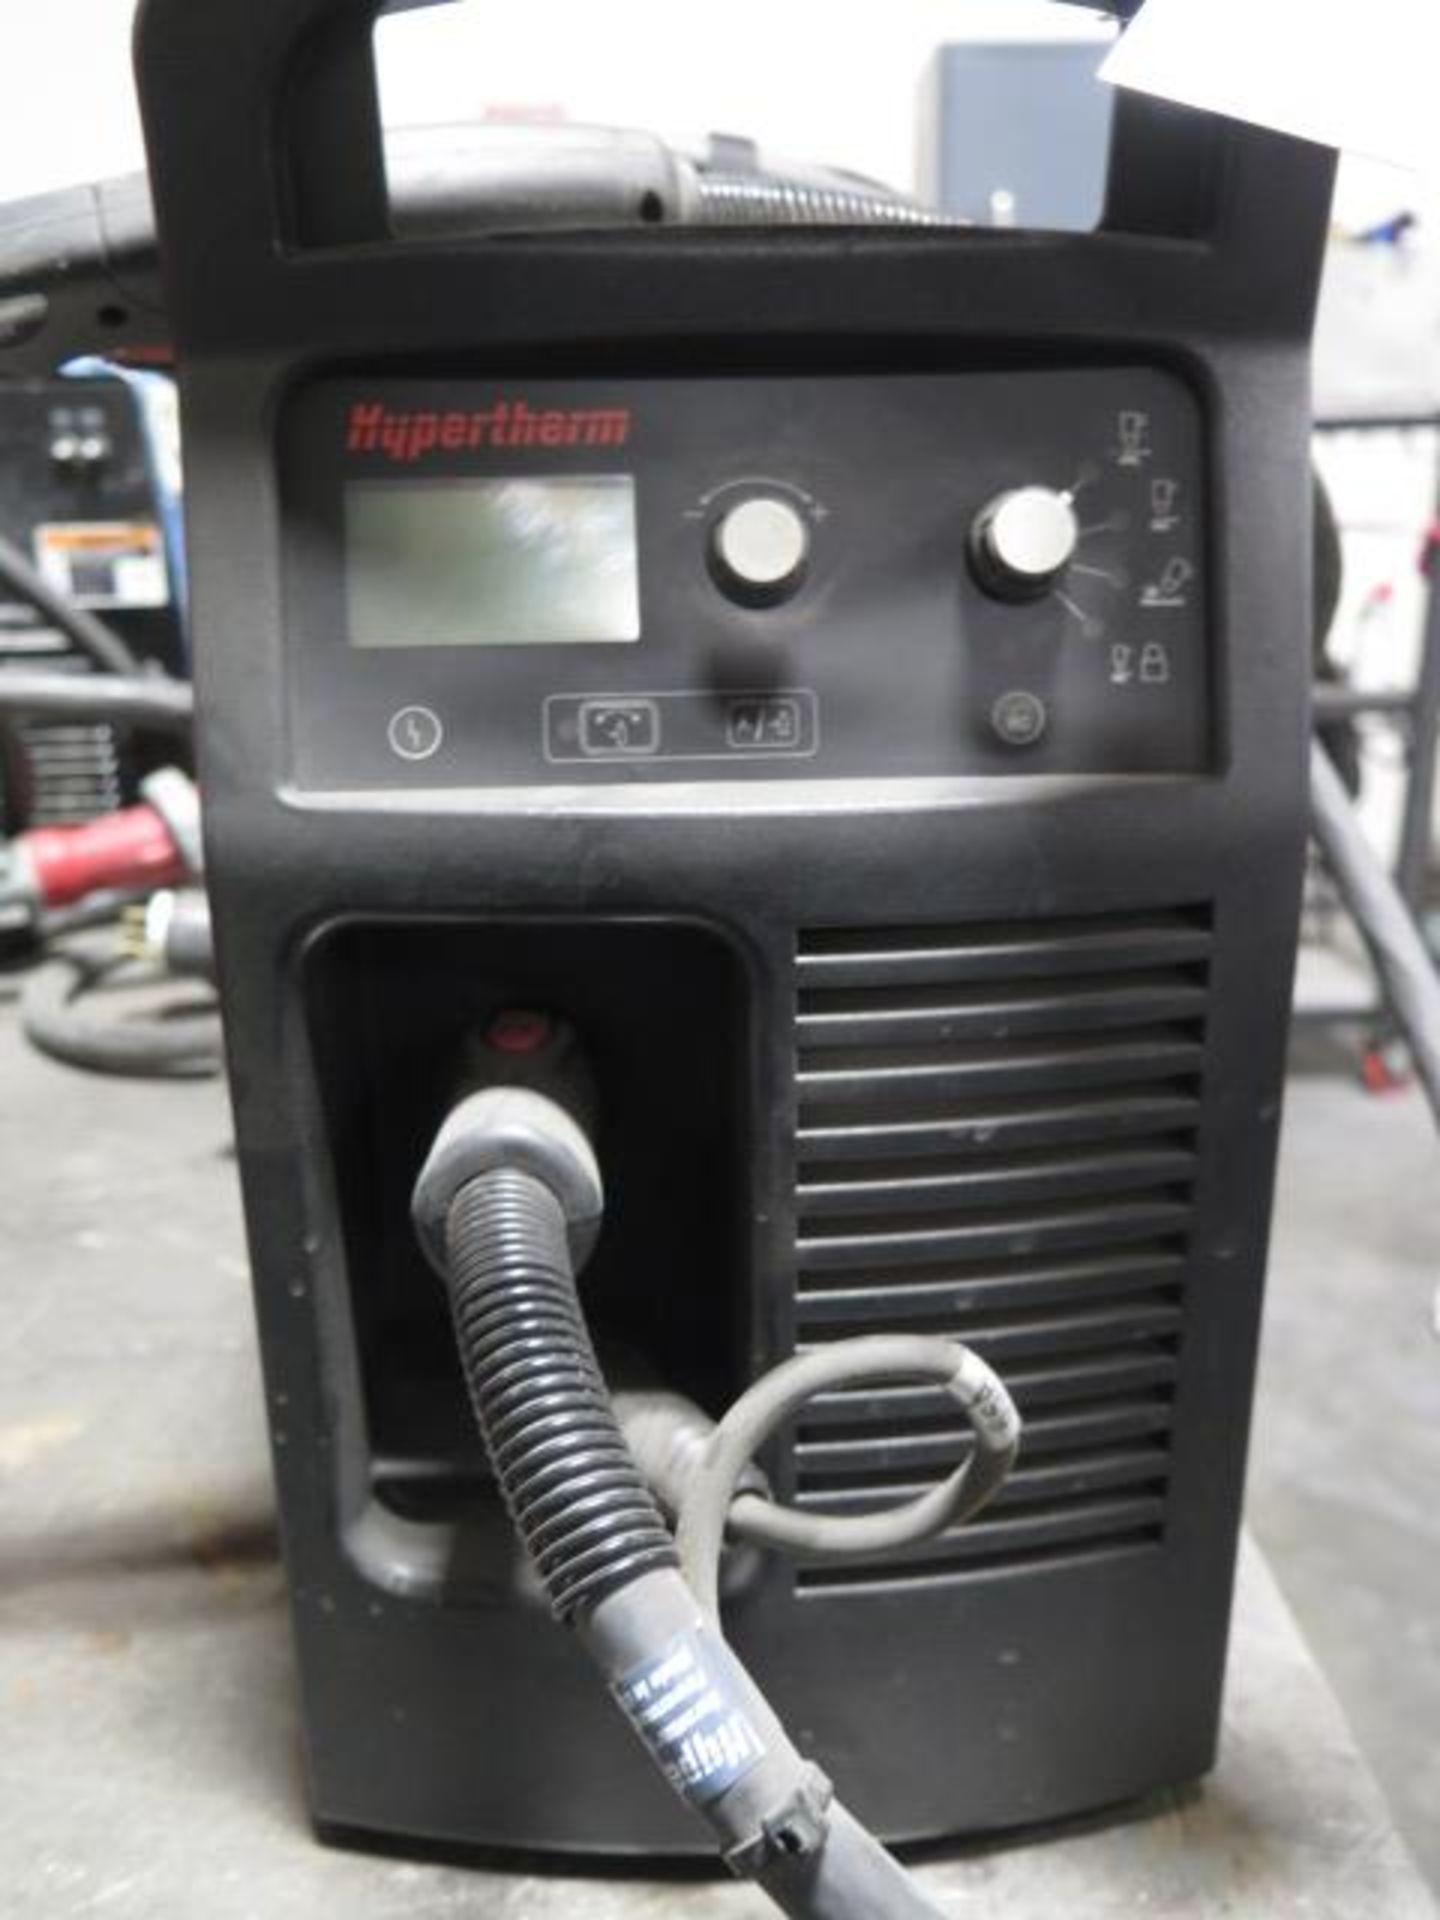 Hypertherm PowerMAX 65 Plasma Cutting Power Source s/n 65-026997 (SOLD AS-IS - NO WARRANTY) - Image 5 of 6